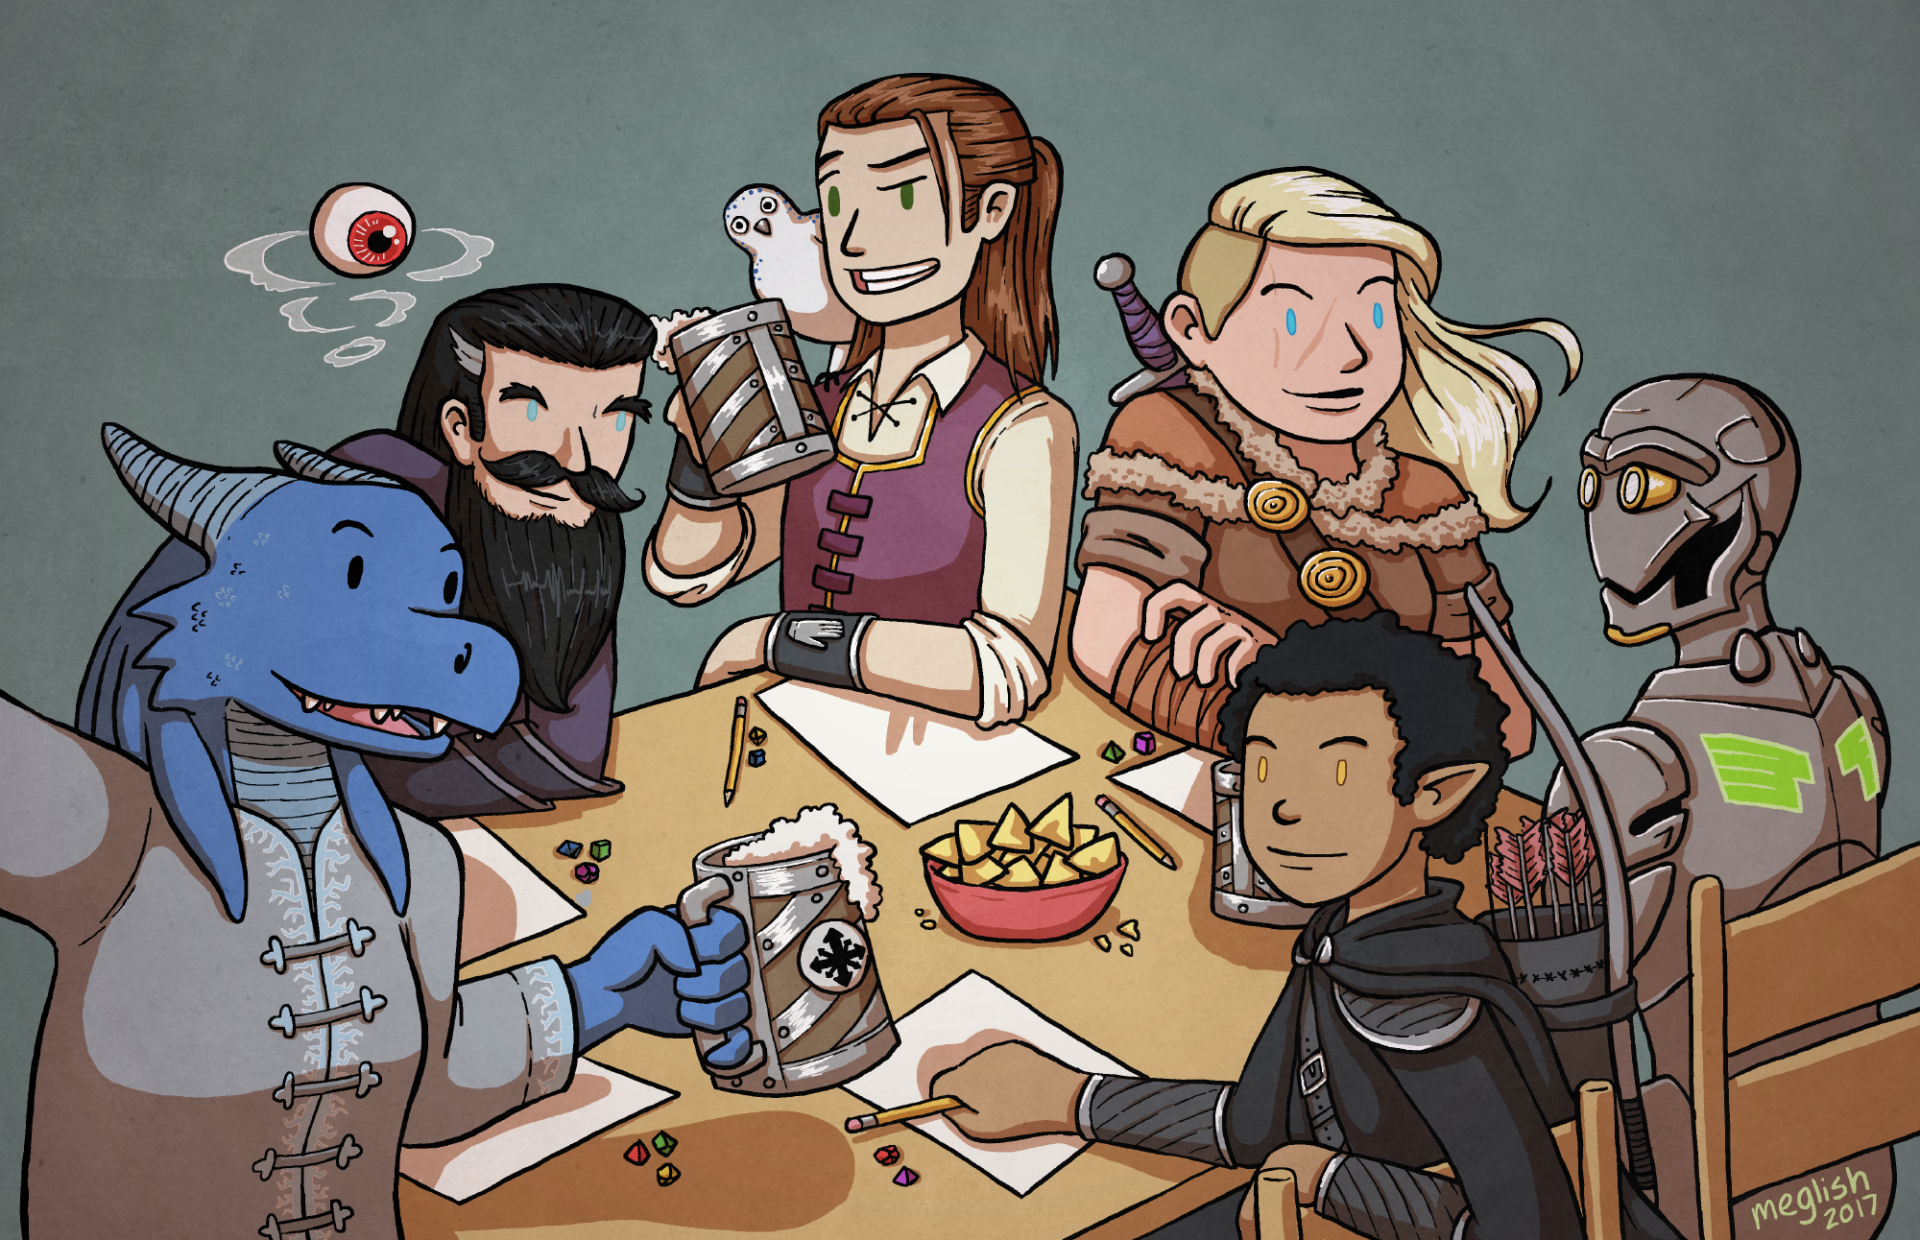 illustration of 6 D&D characters around.a table playing a pen & paper game - a blue Dragonborne, a dark-haired wizard, a bard with a brown ponytail and a flagon, a blonde barbarian, a Warforged, and a dark-haired elf rogue